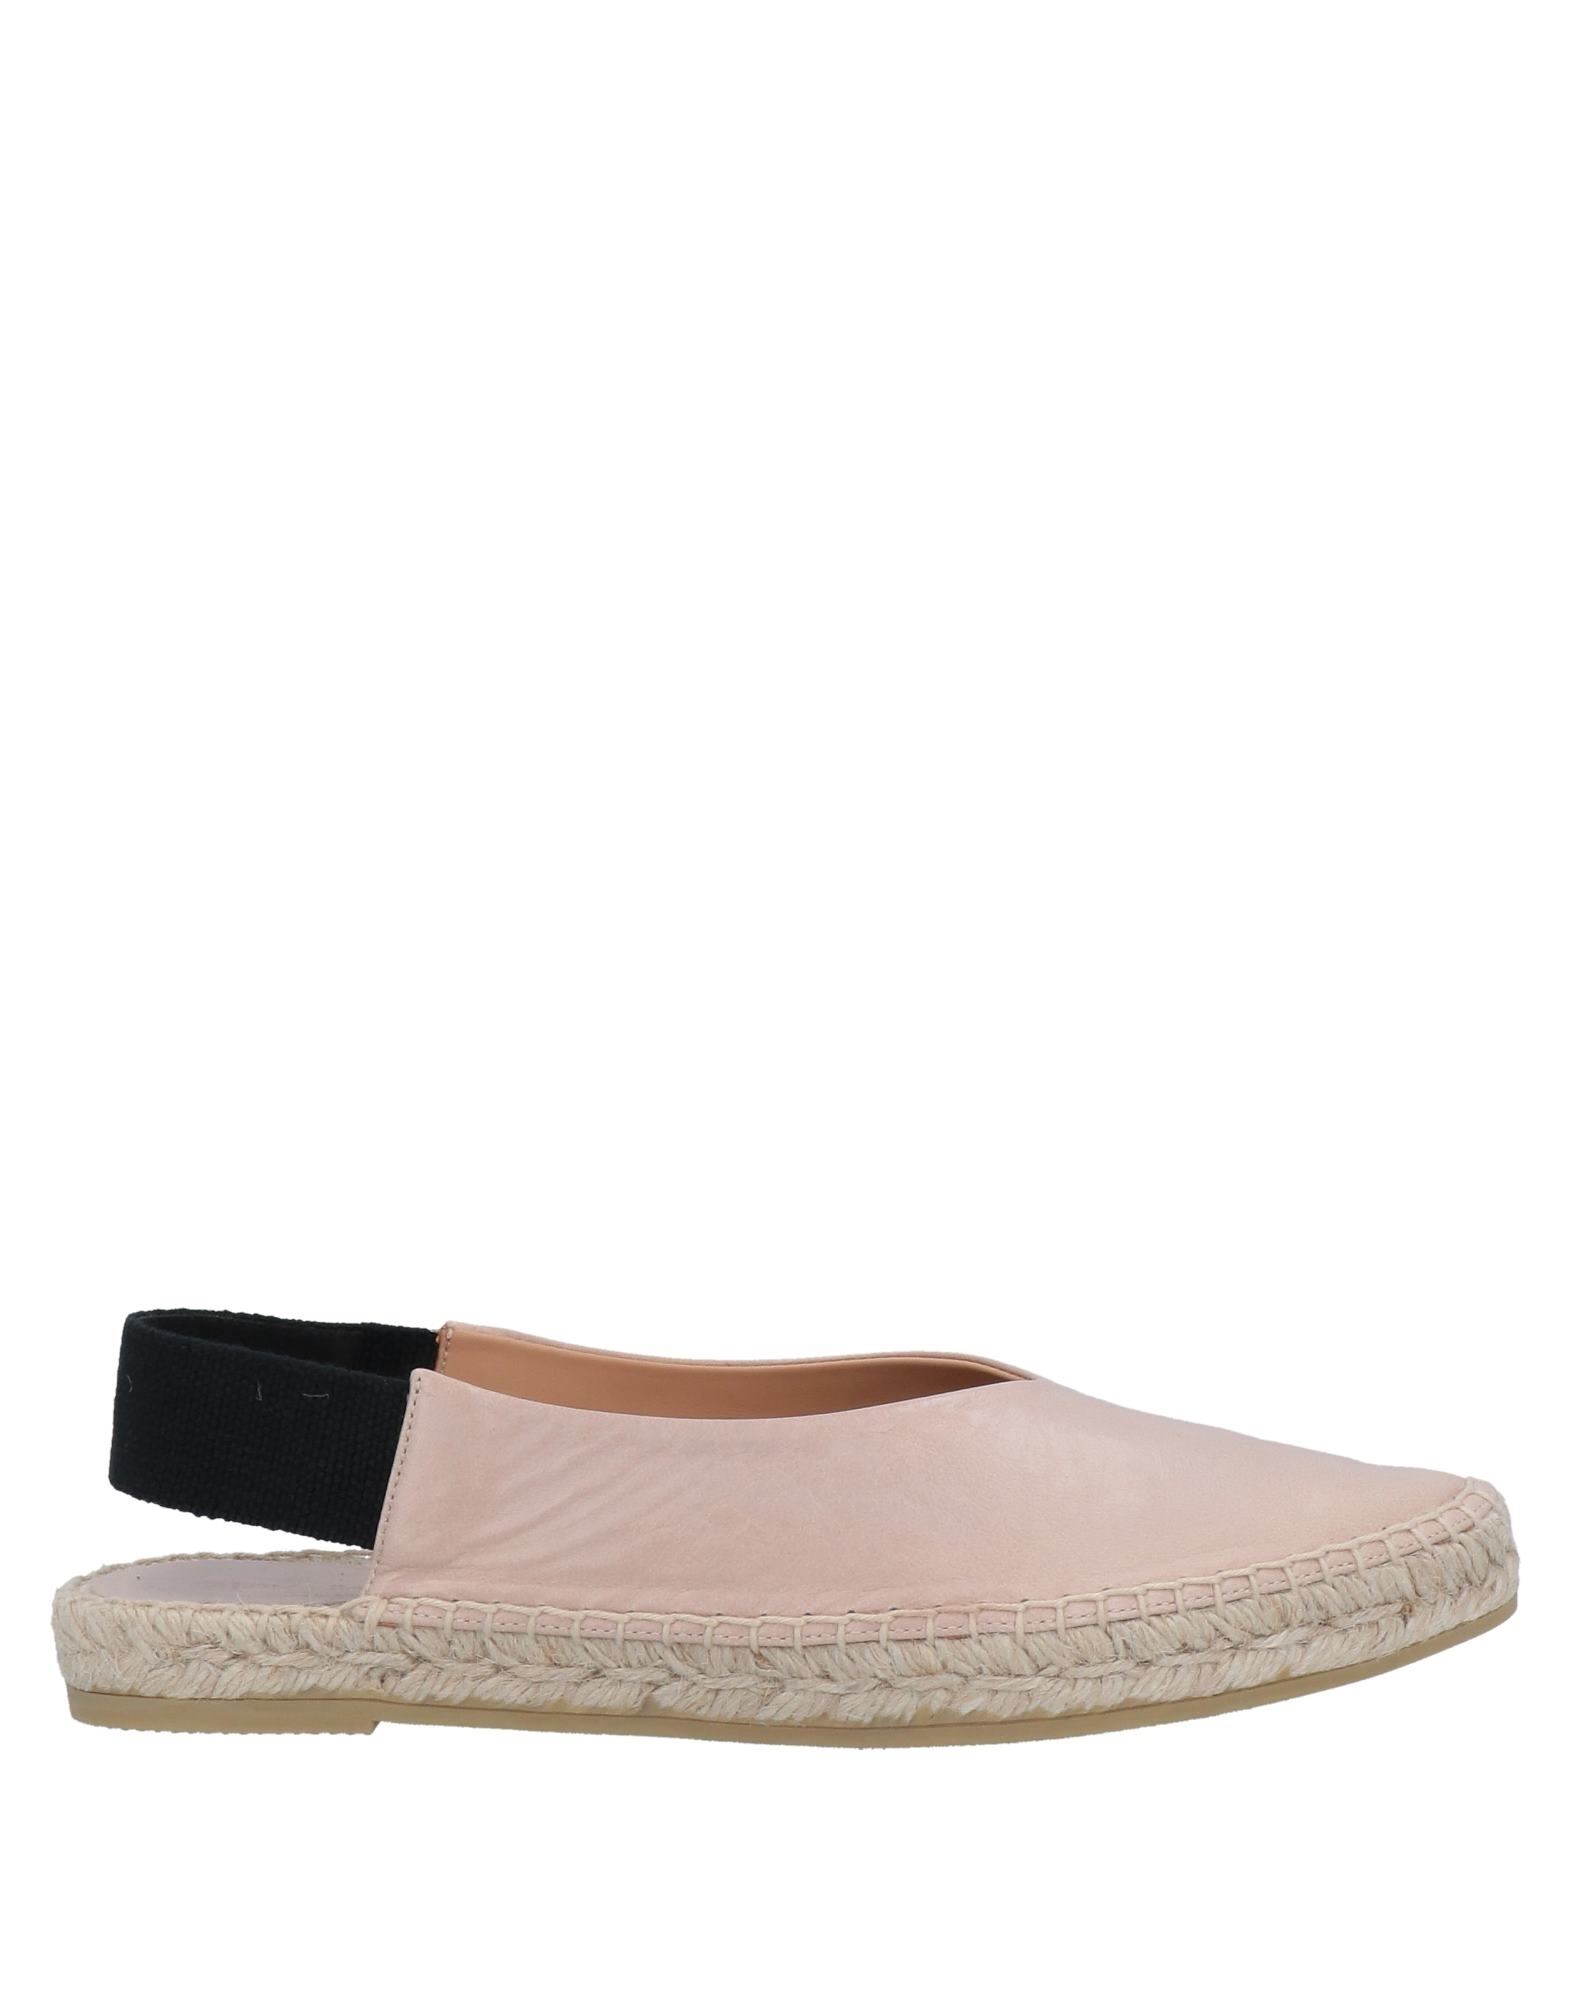 Paloma Barceló Ballet Flats In Pink